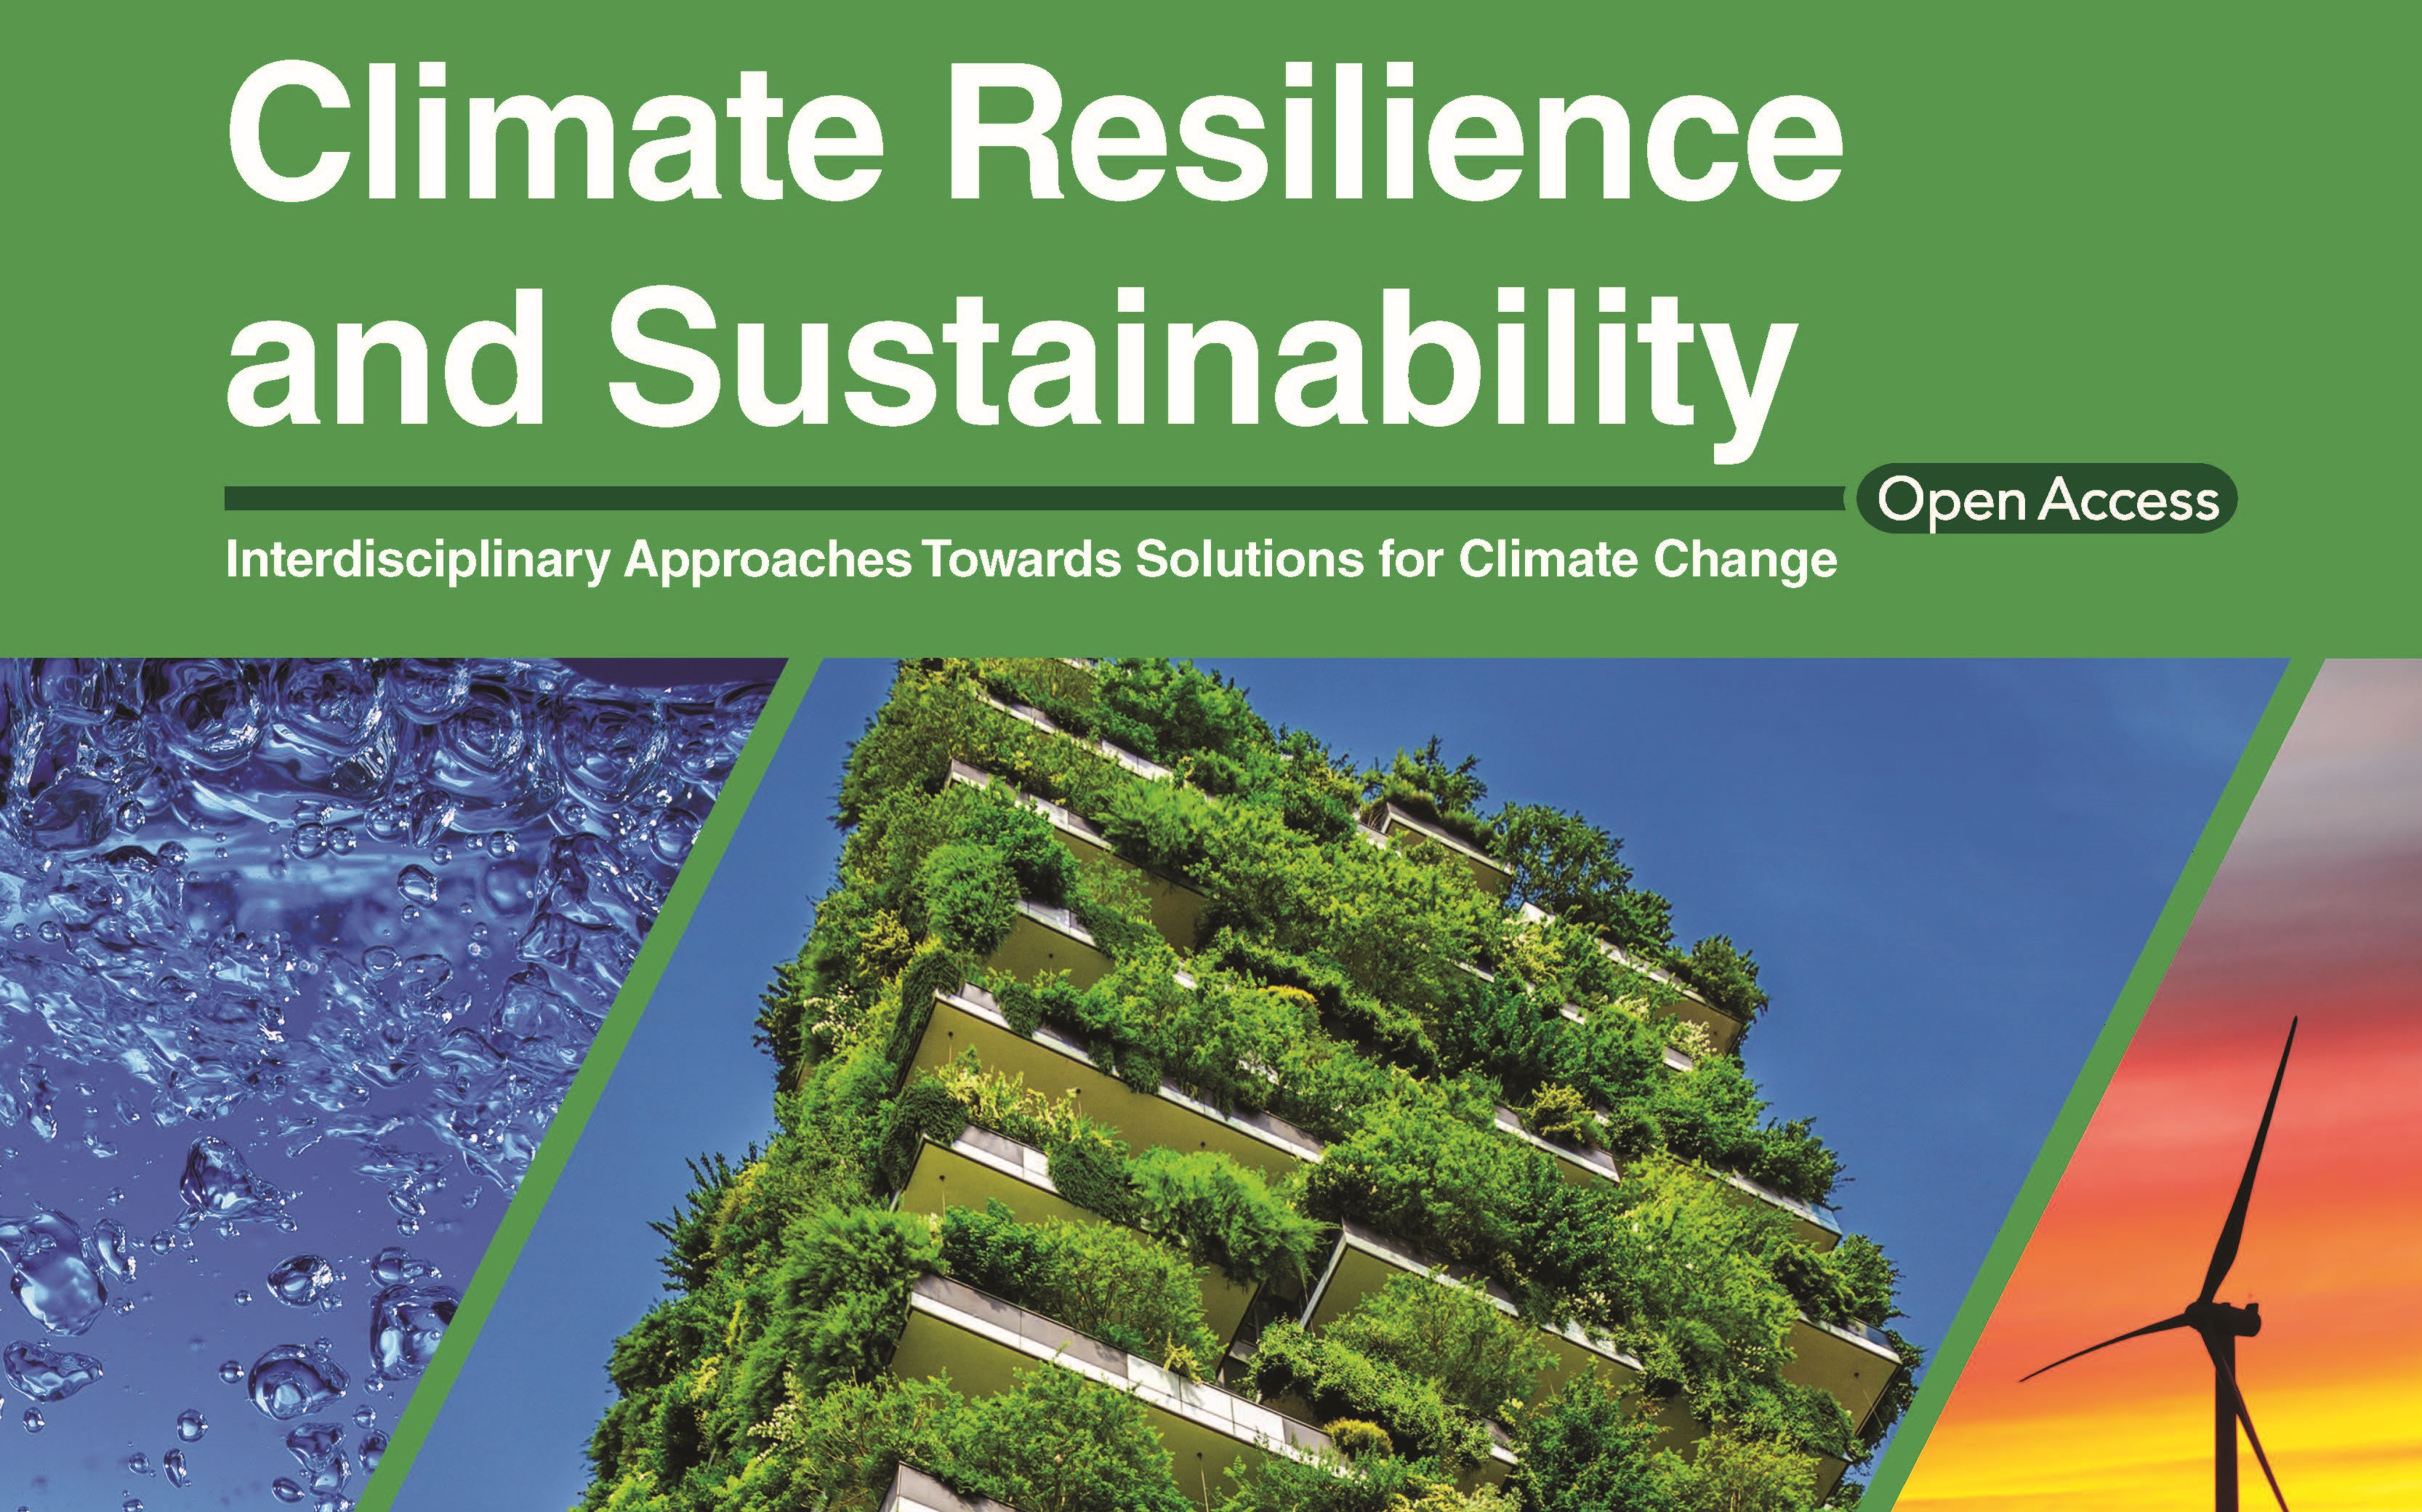 Front cover of Climate Resilience and Sustainability. Shows a building covered in foliage, a wind farm and bubbles